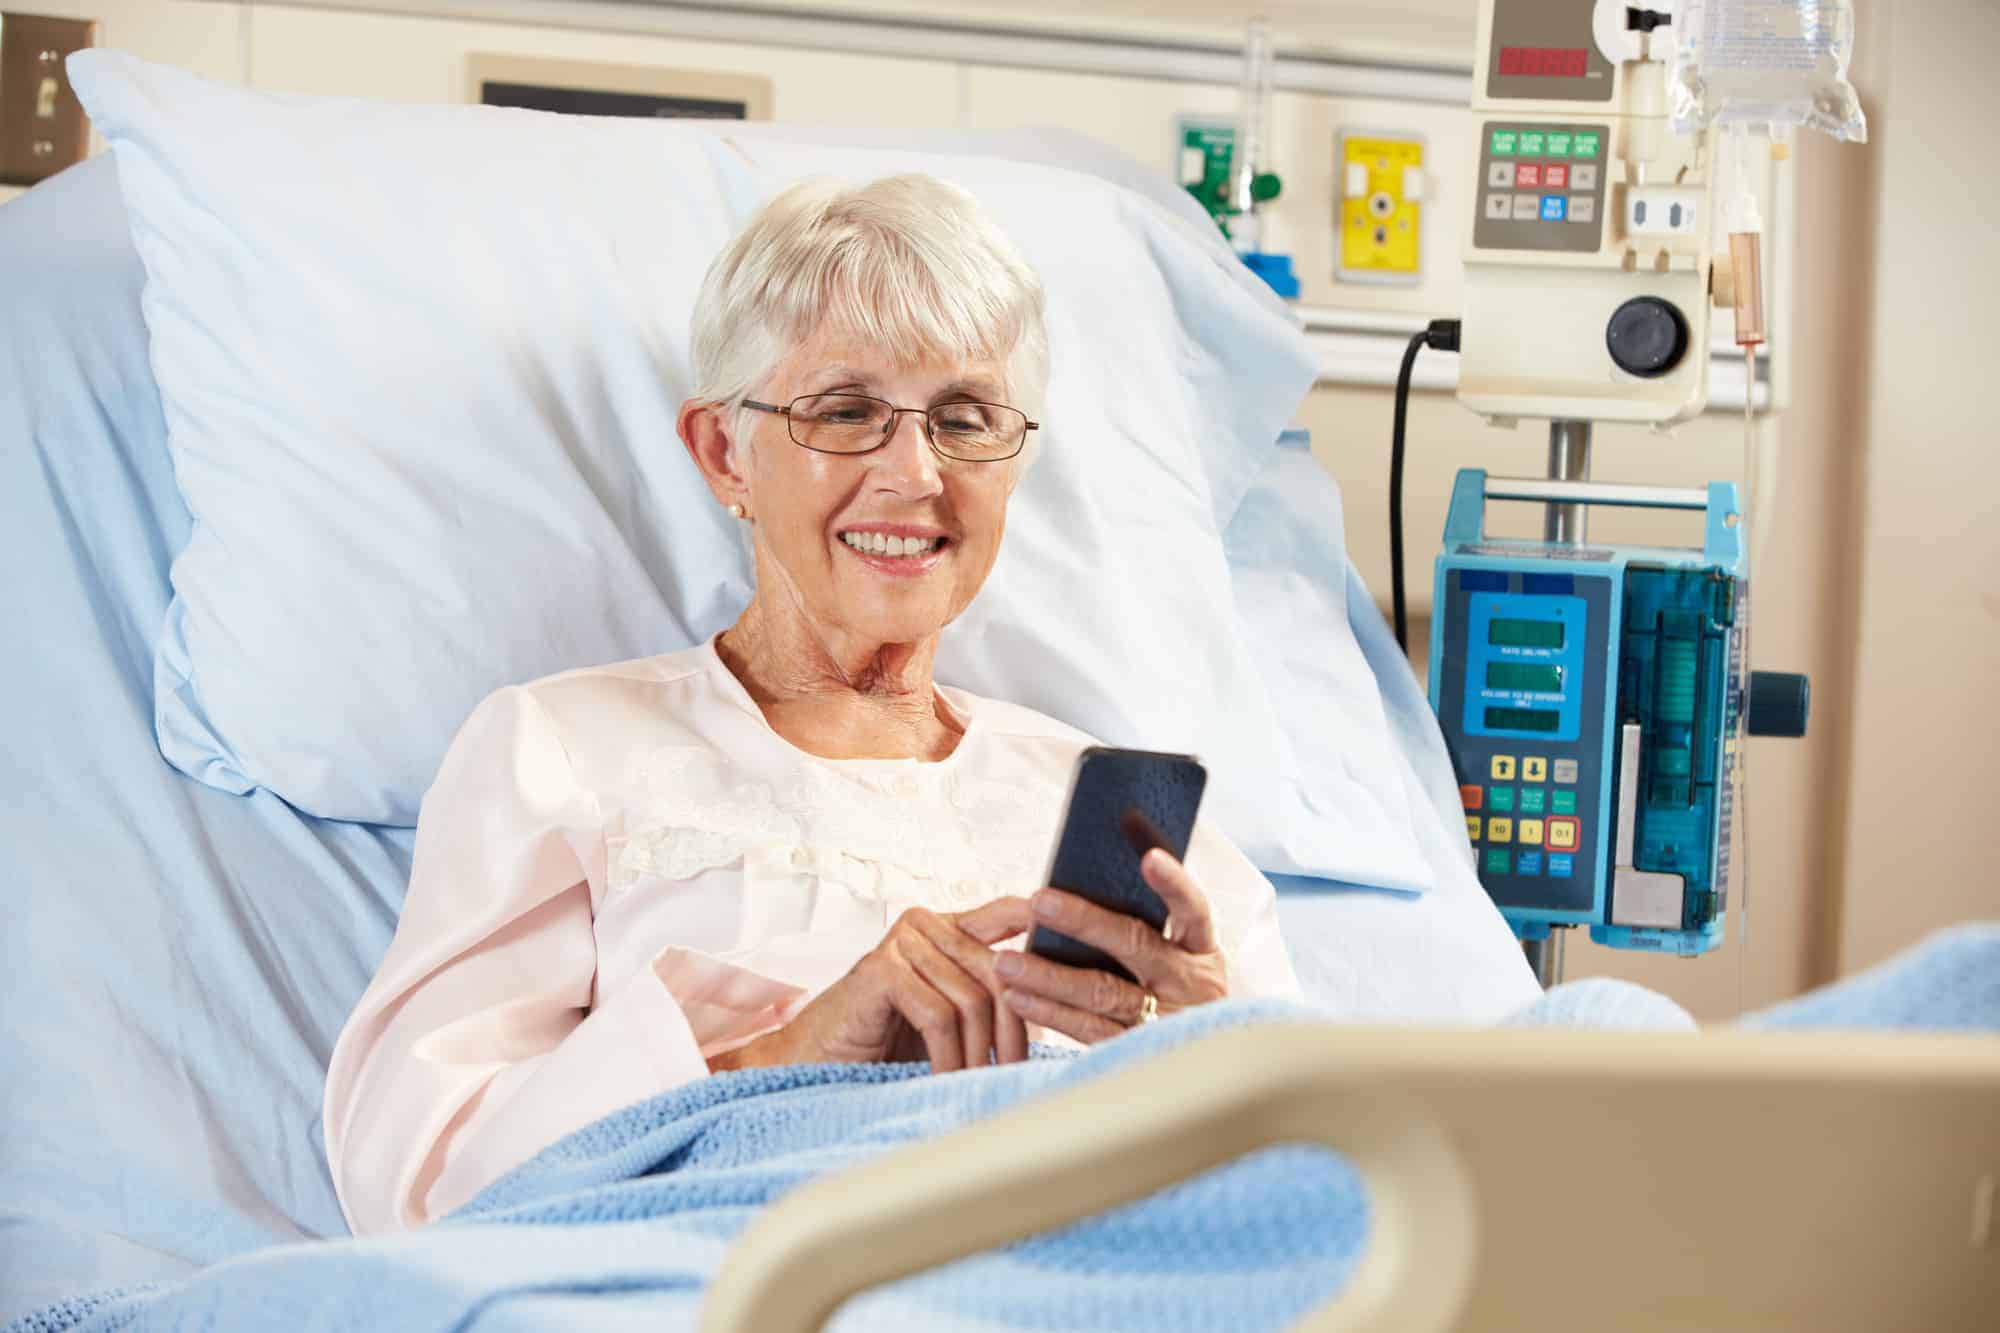 A patient using a cell phone on an adjustable hospital bed.